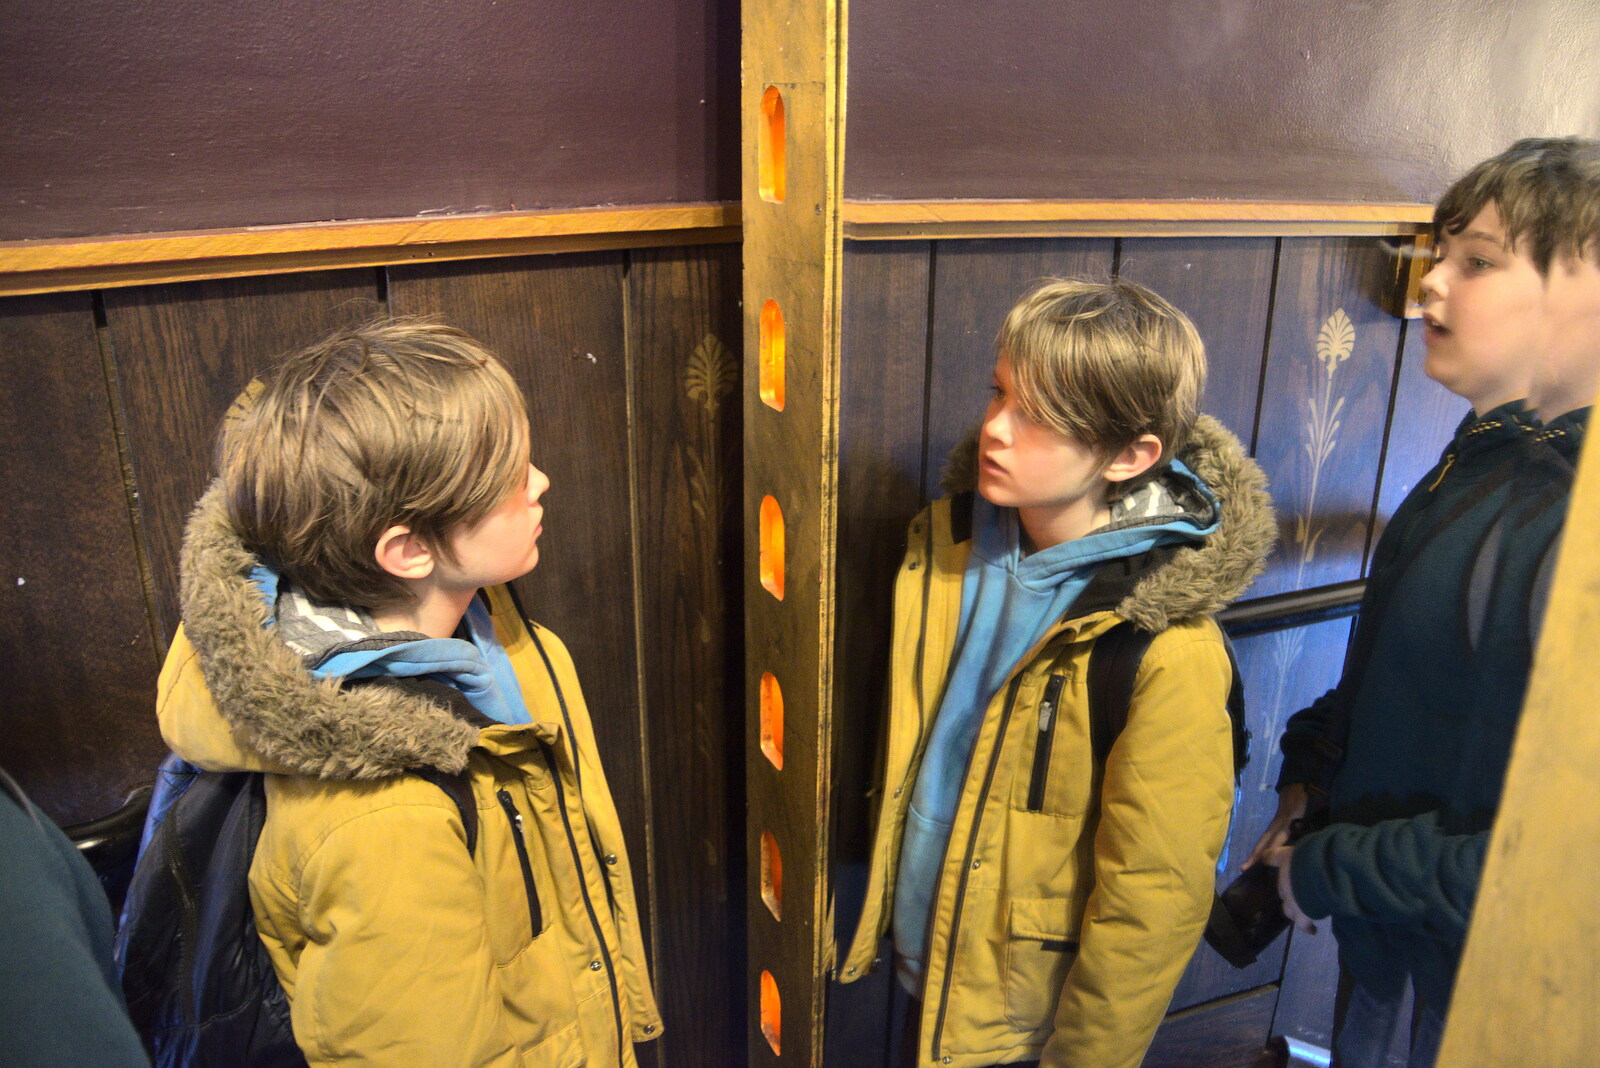 Blackrock North and South, Louth and County Dublin, Ireland - 23rd April 2022: Harry and Fred look in a funky mirror